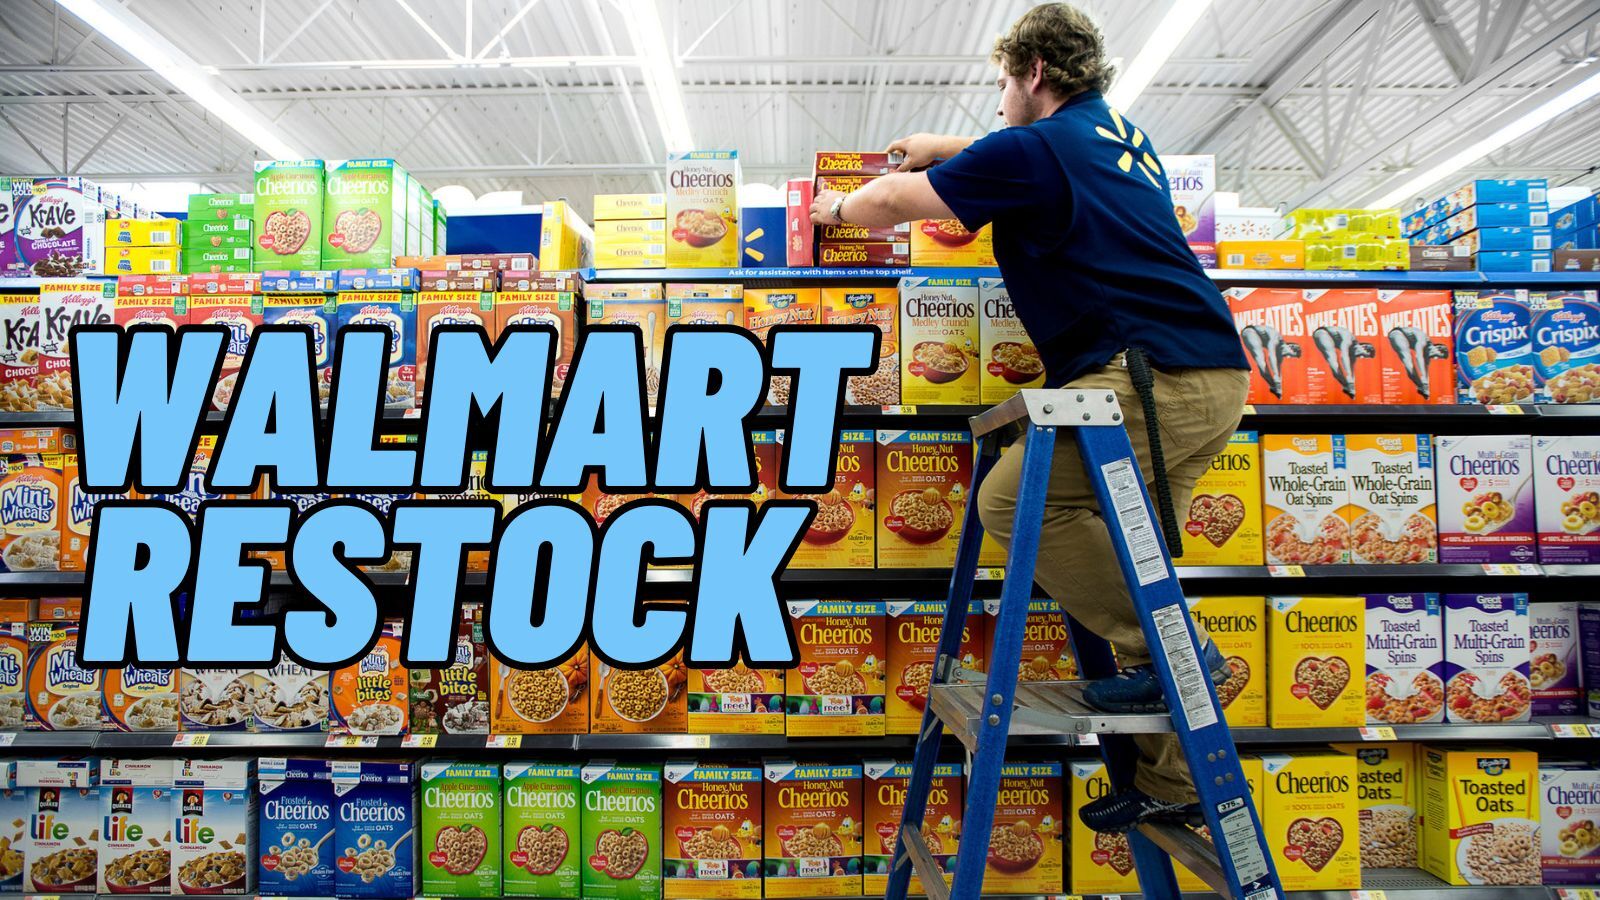 When Does Walmart Restock? (Timely Updates for Various Product Categories)